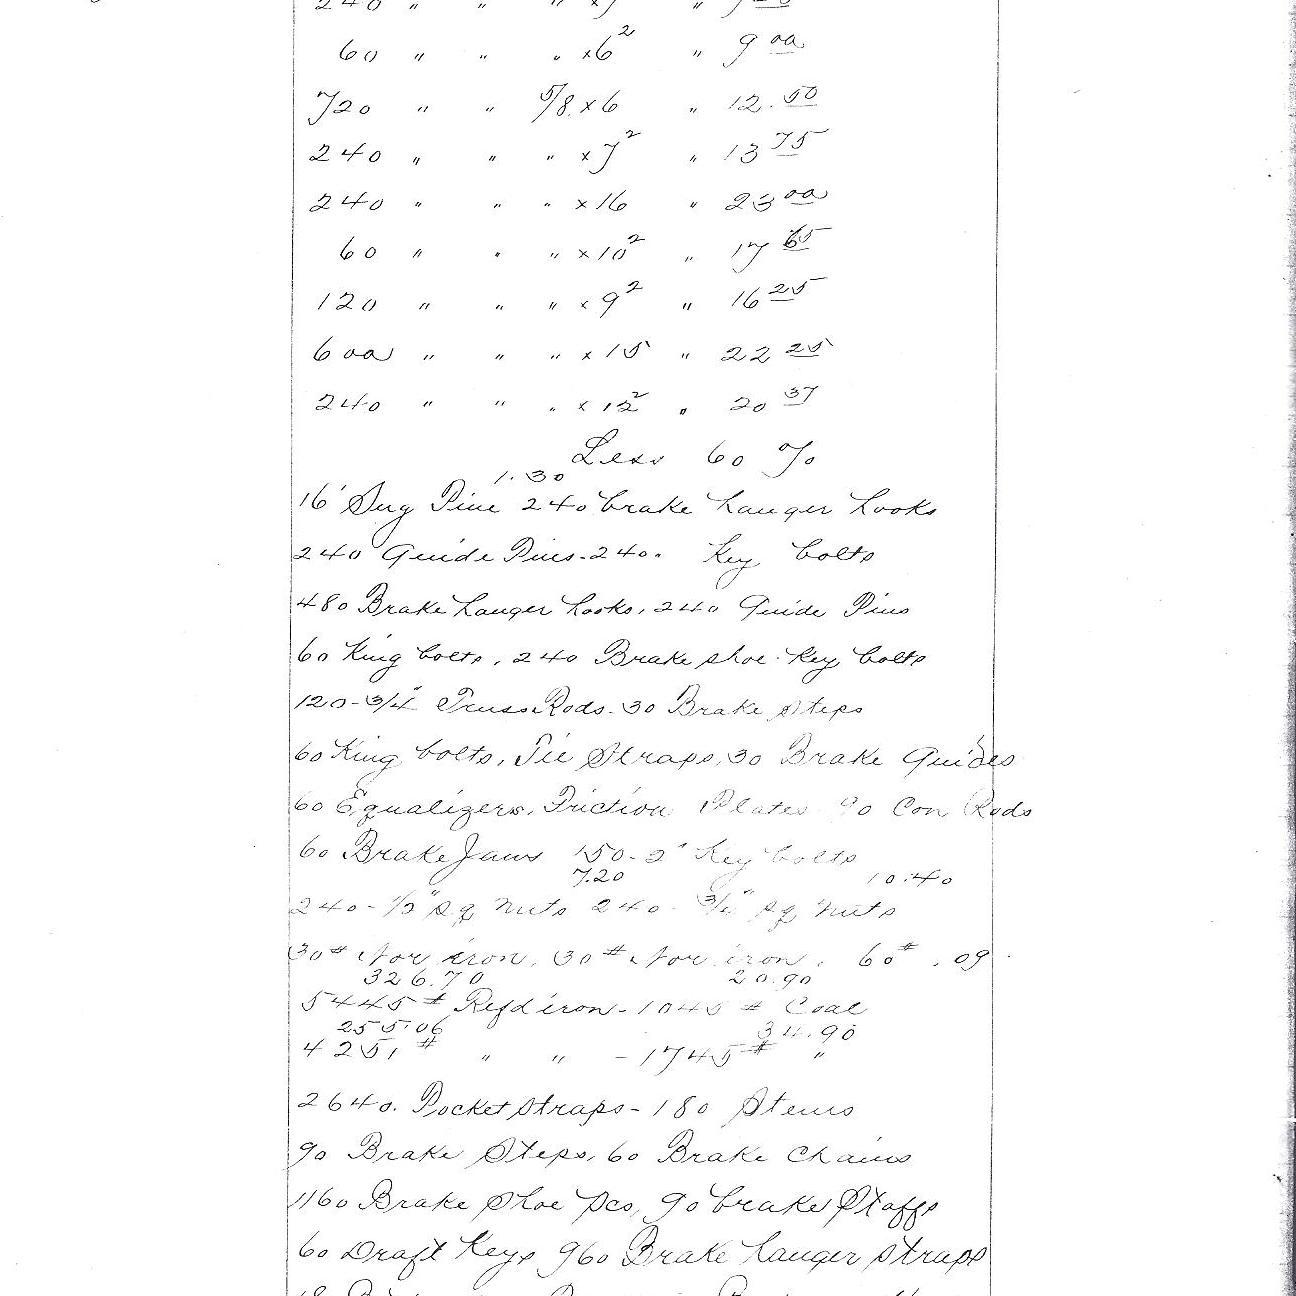 Invoice for construction of 30 flatcars from the V. & T.